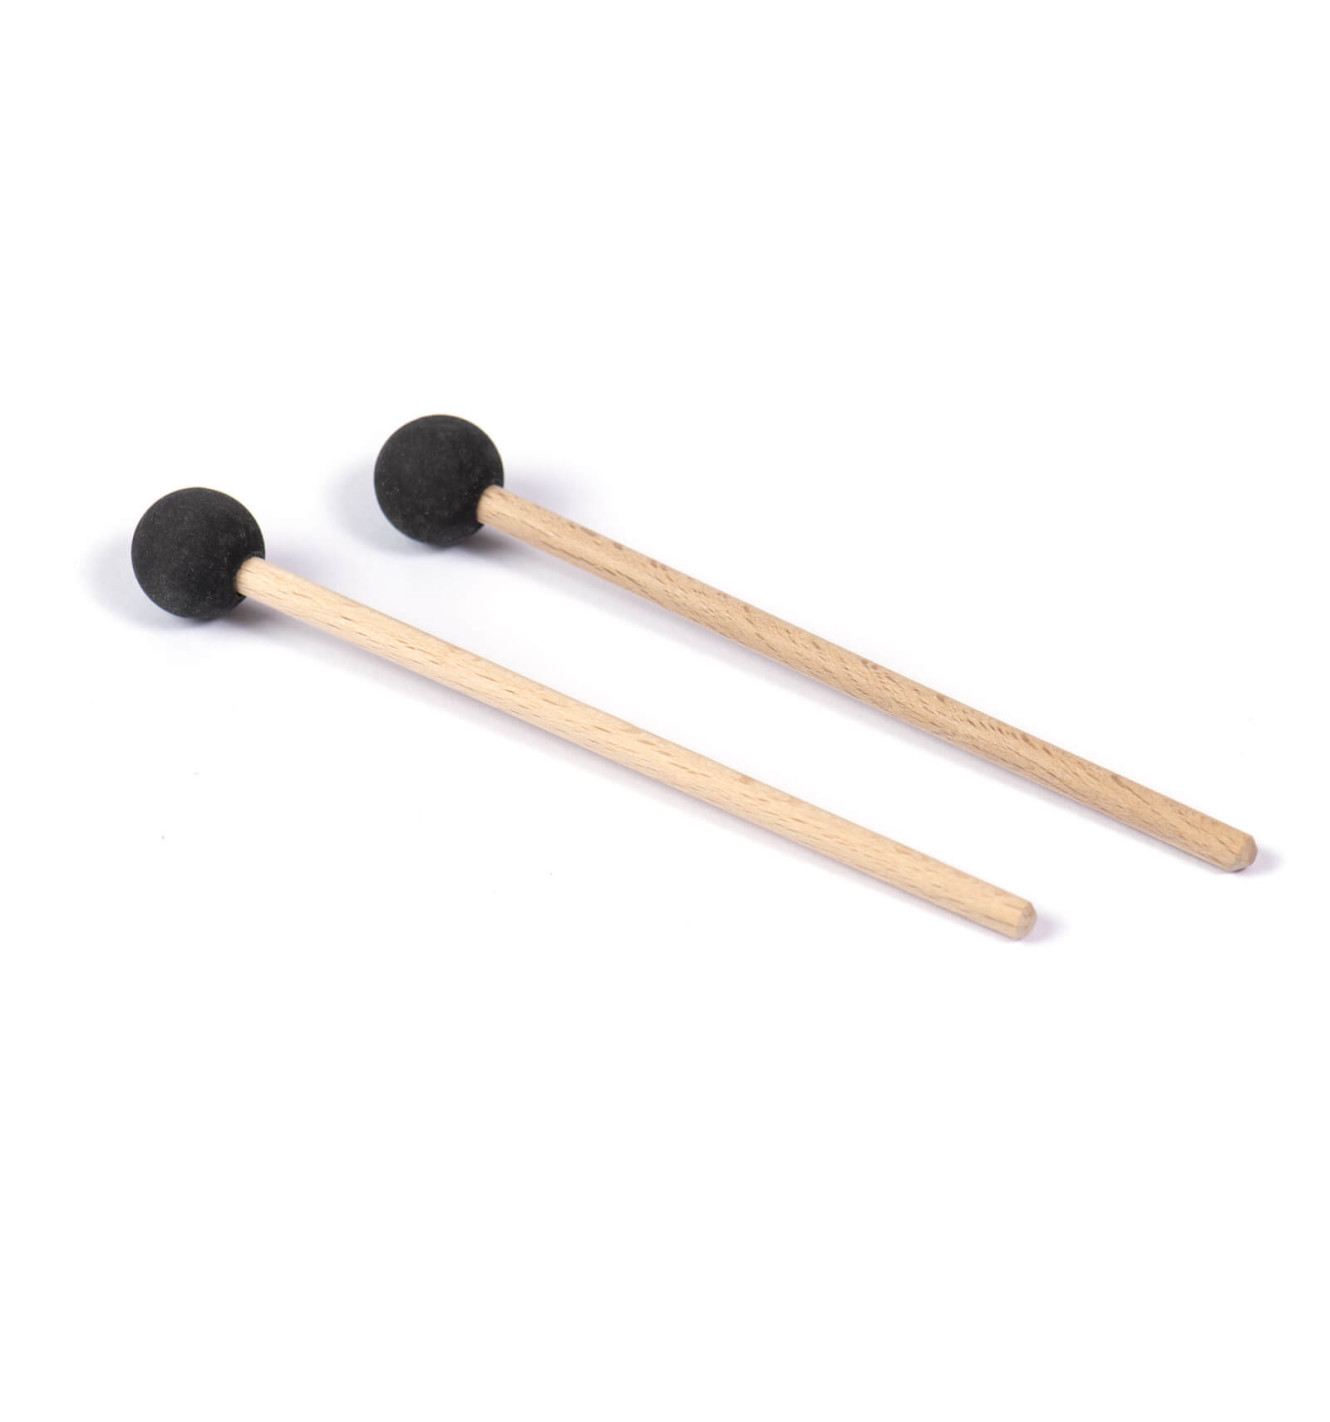 Mallets for Zenko Element and other steel tongue drums.